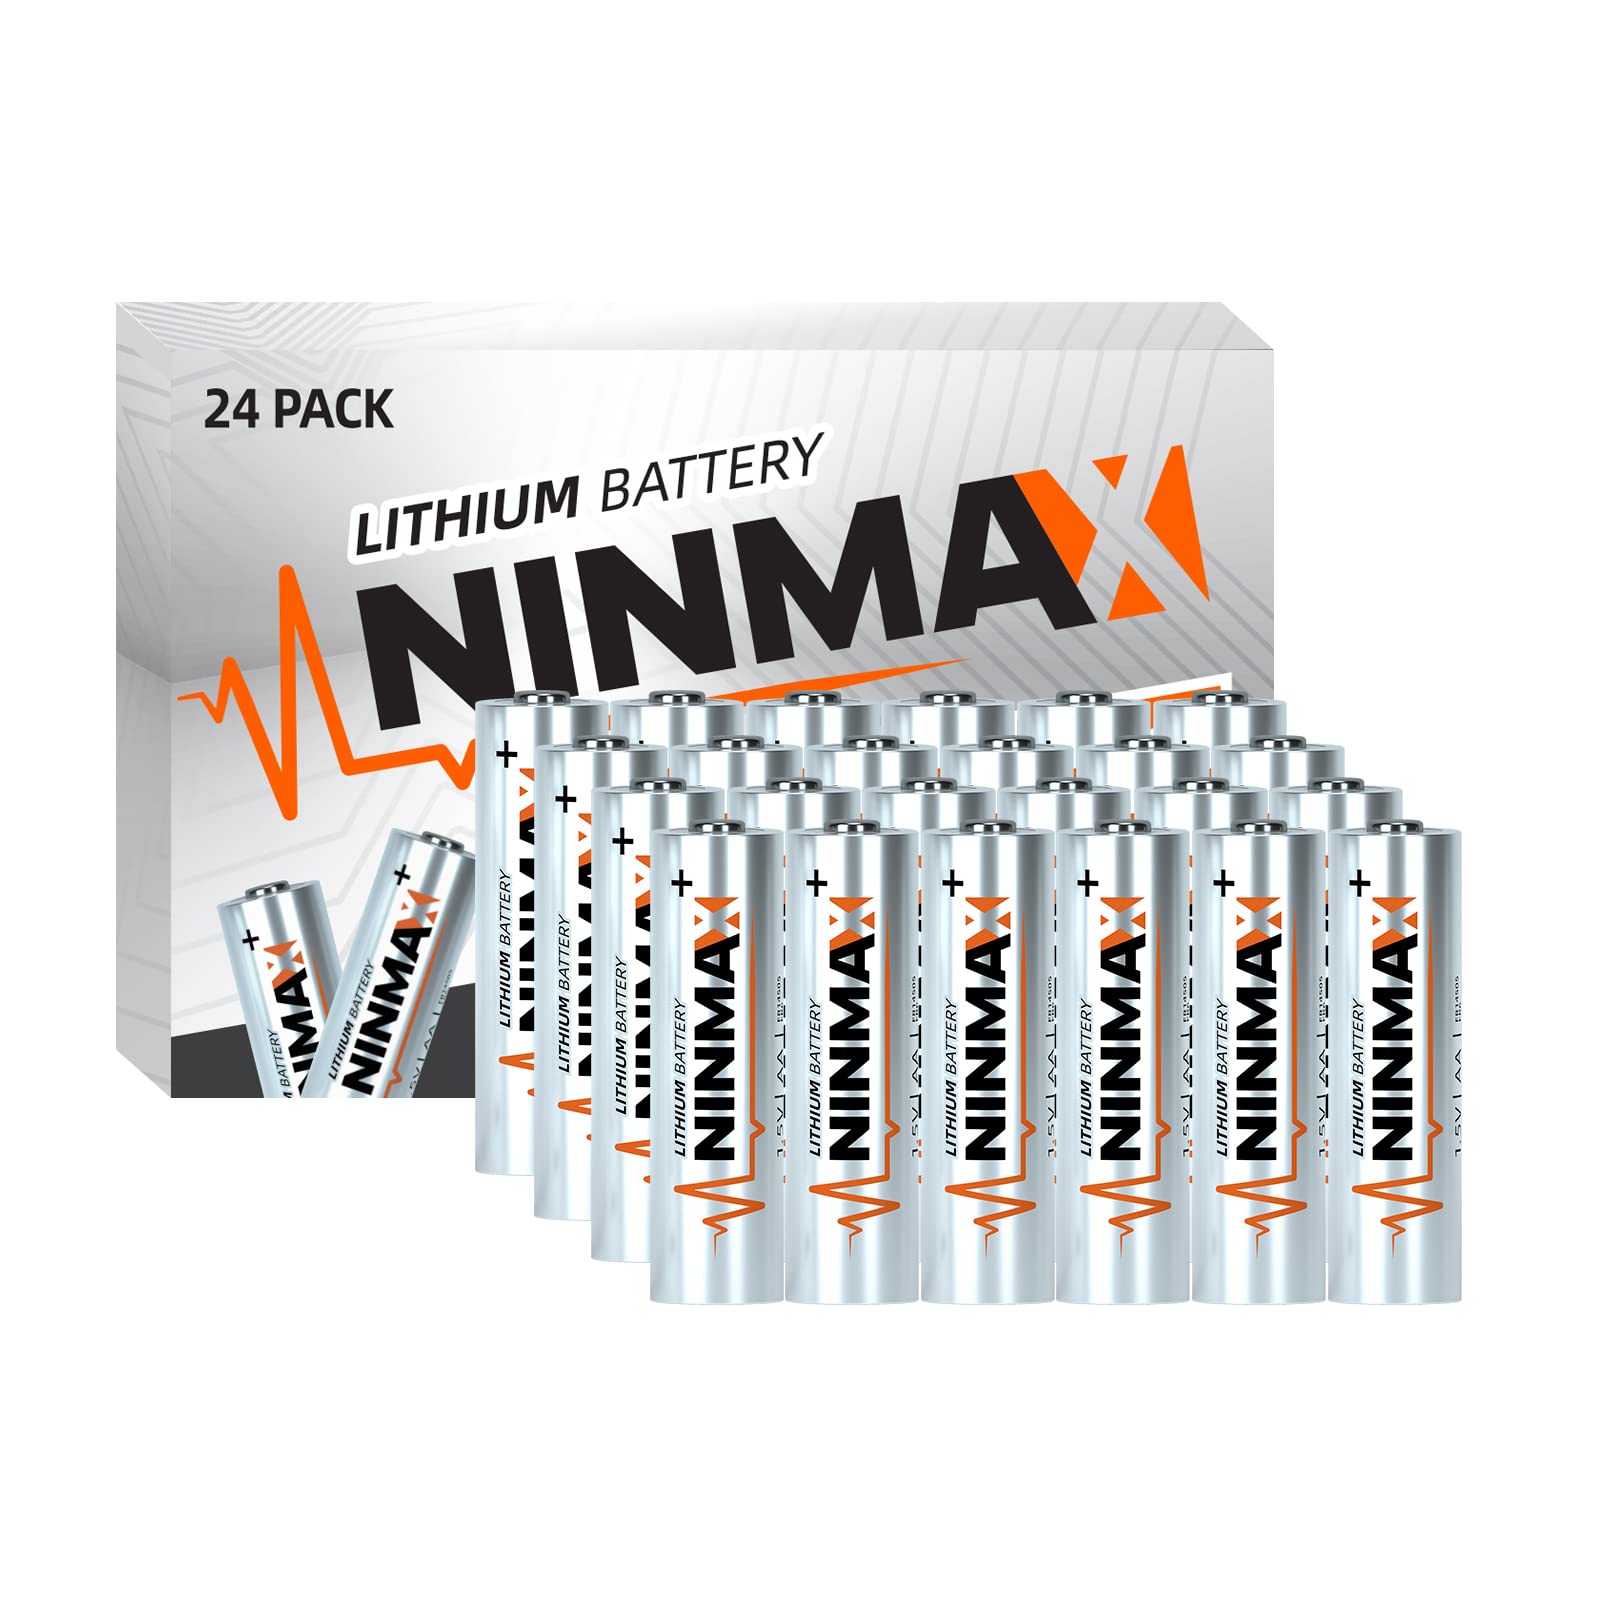 NINMAX Lithium AA Batteries 3500mAh, 24 Pack 1.5V Longest Lasting Double A Battery for High-Tech Devices【Non-Rechargeable】-New Upgraded